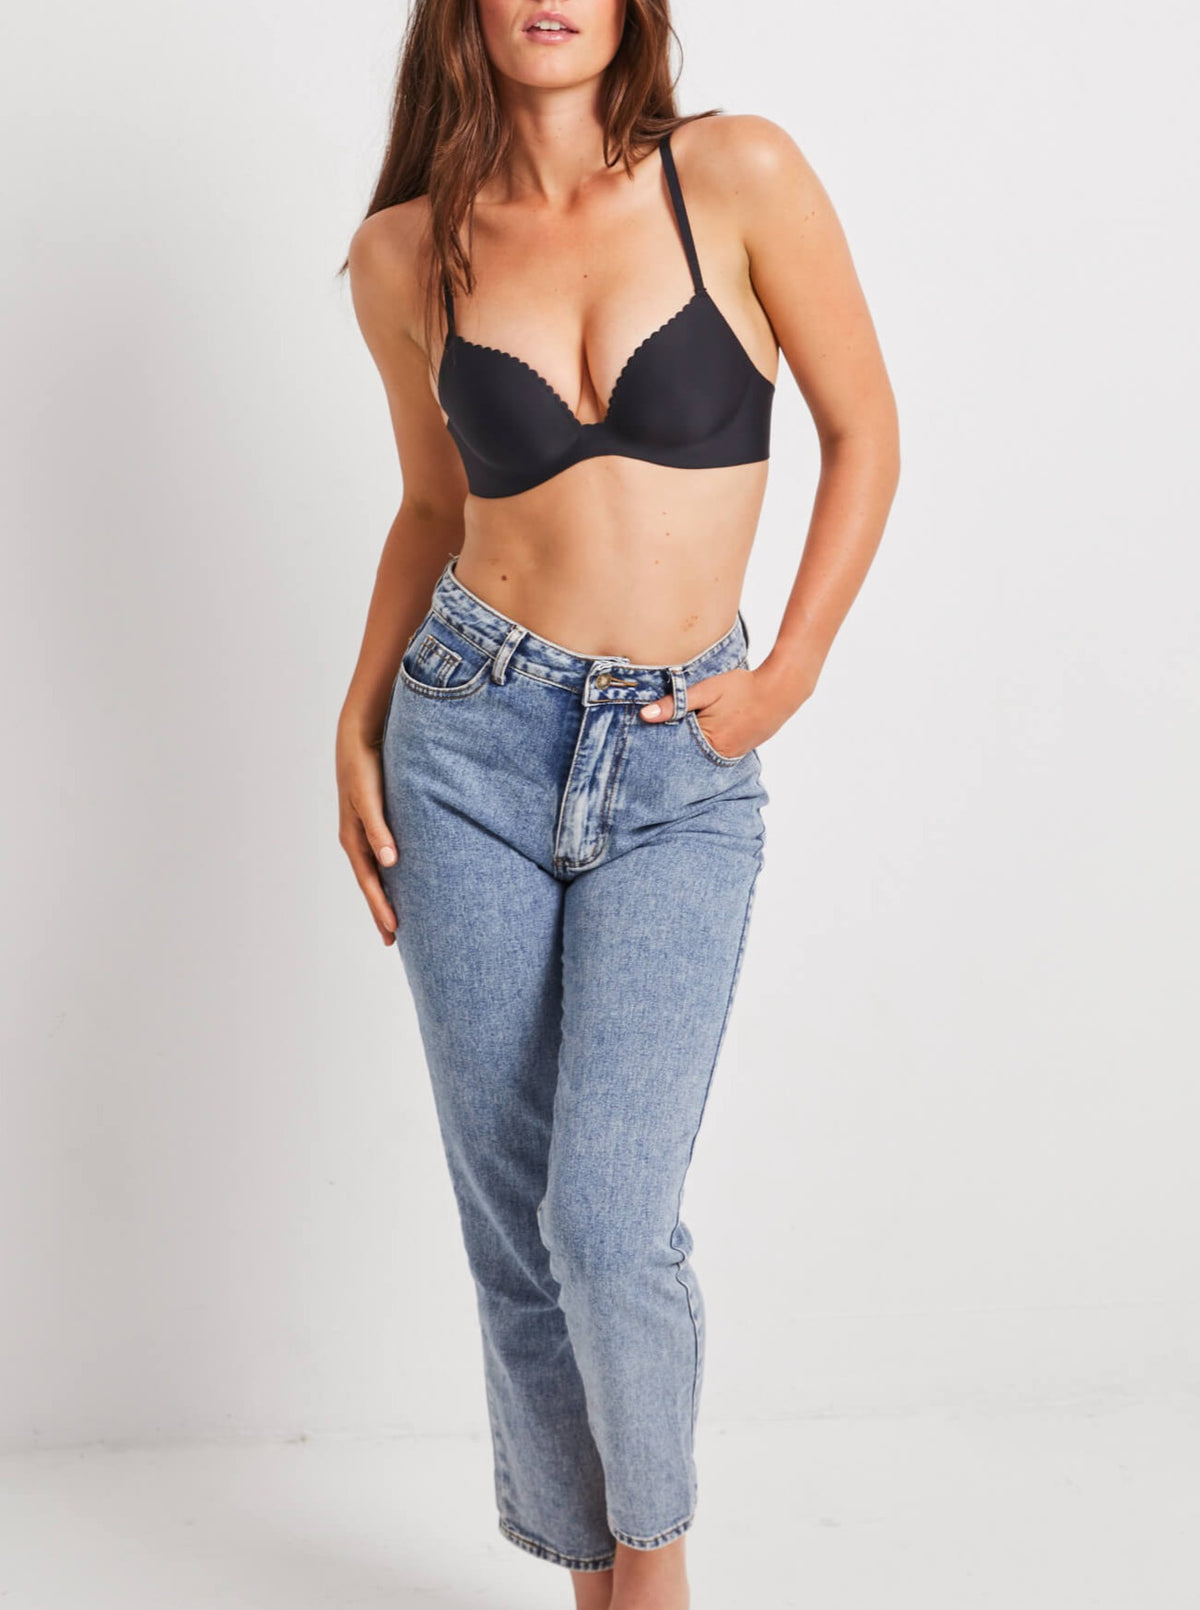 Woman standing wearing Kayser Very Smooth One Piece Bra in Black with jeans